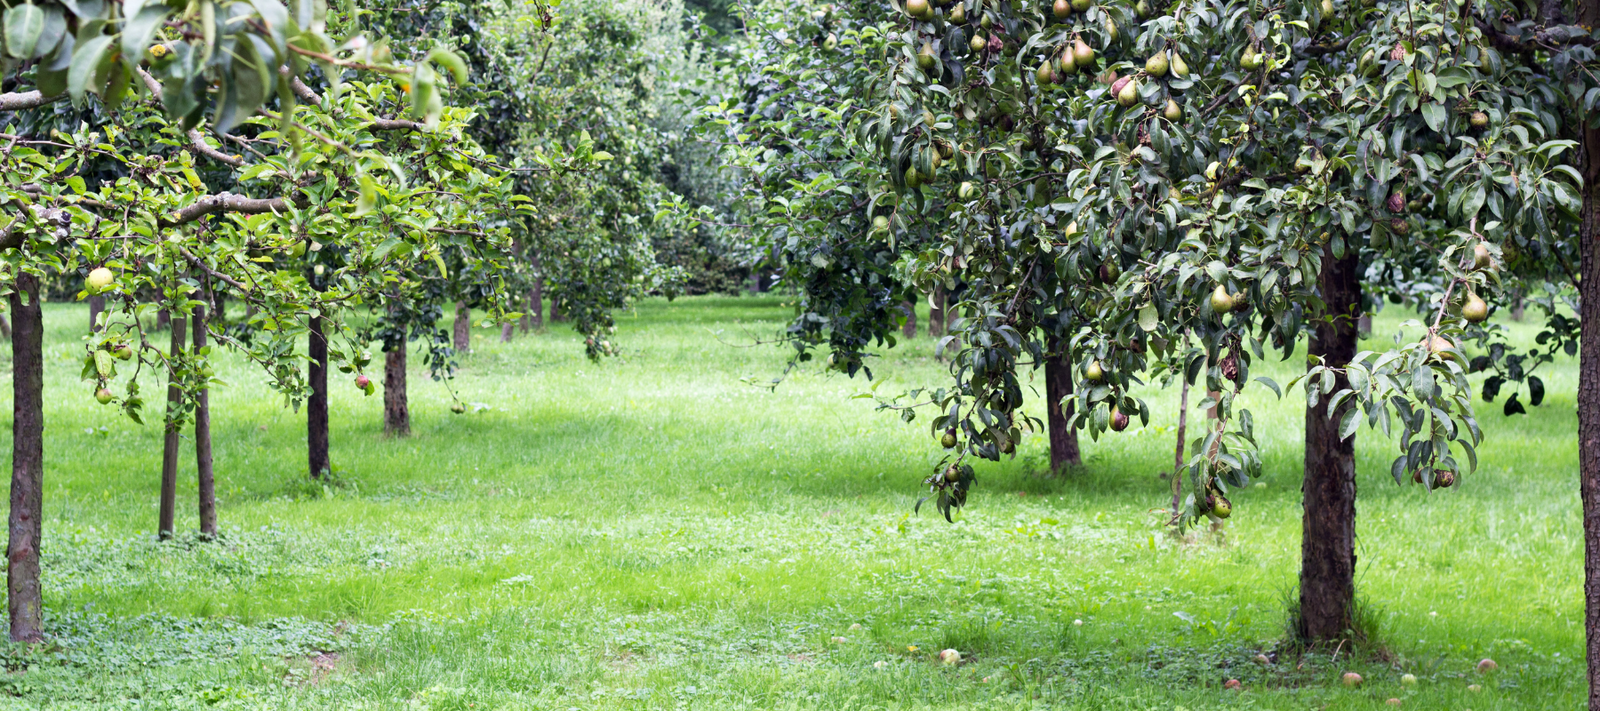 Maximising yield by summer pruning fruit trees - The Diggers Club